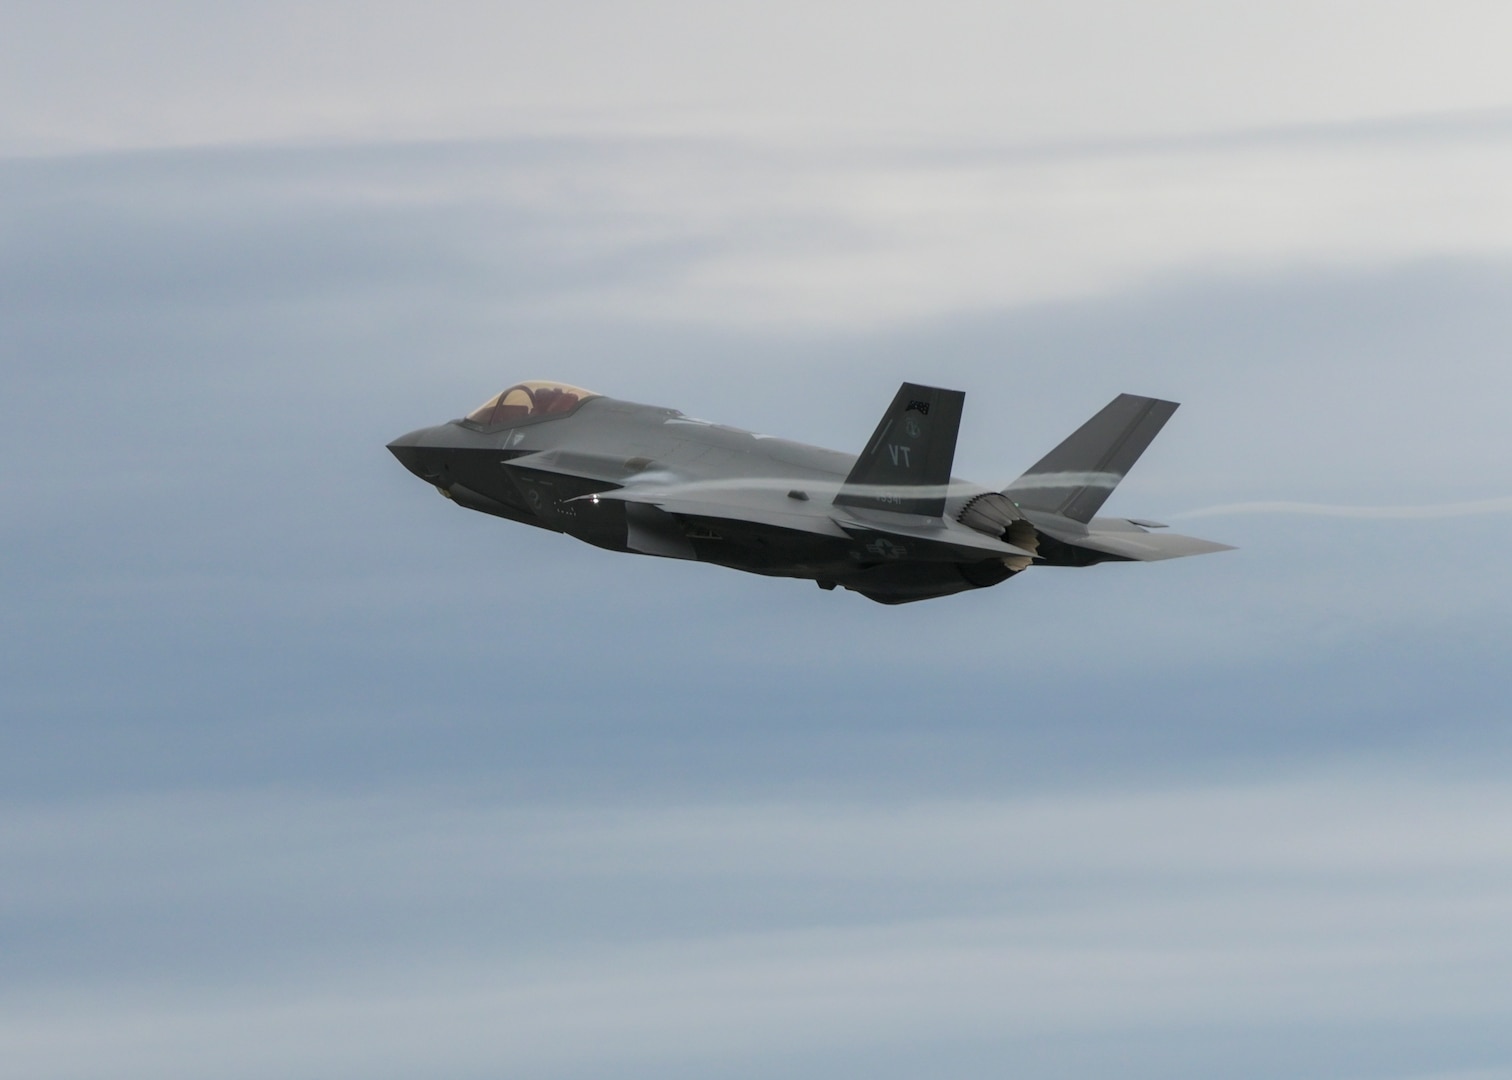 An F-35 Lightning II Aircraft assigned to the 158th Fighter Wing, Burlington Air National Guard Base, Vermont takes off April 13, 2022 from Burlington International Airport, Vermont. The Vermont Air National Guard was the first unit of the Air National Guard to receive the 5th Generation fighter and Madison's 115th Fighter Wing is scheduled to be the second with the arrival of its first F-35 in spring of 2023. (U.S. Air National Guard photo by Staff Sgt. Cameron Lewis)